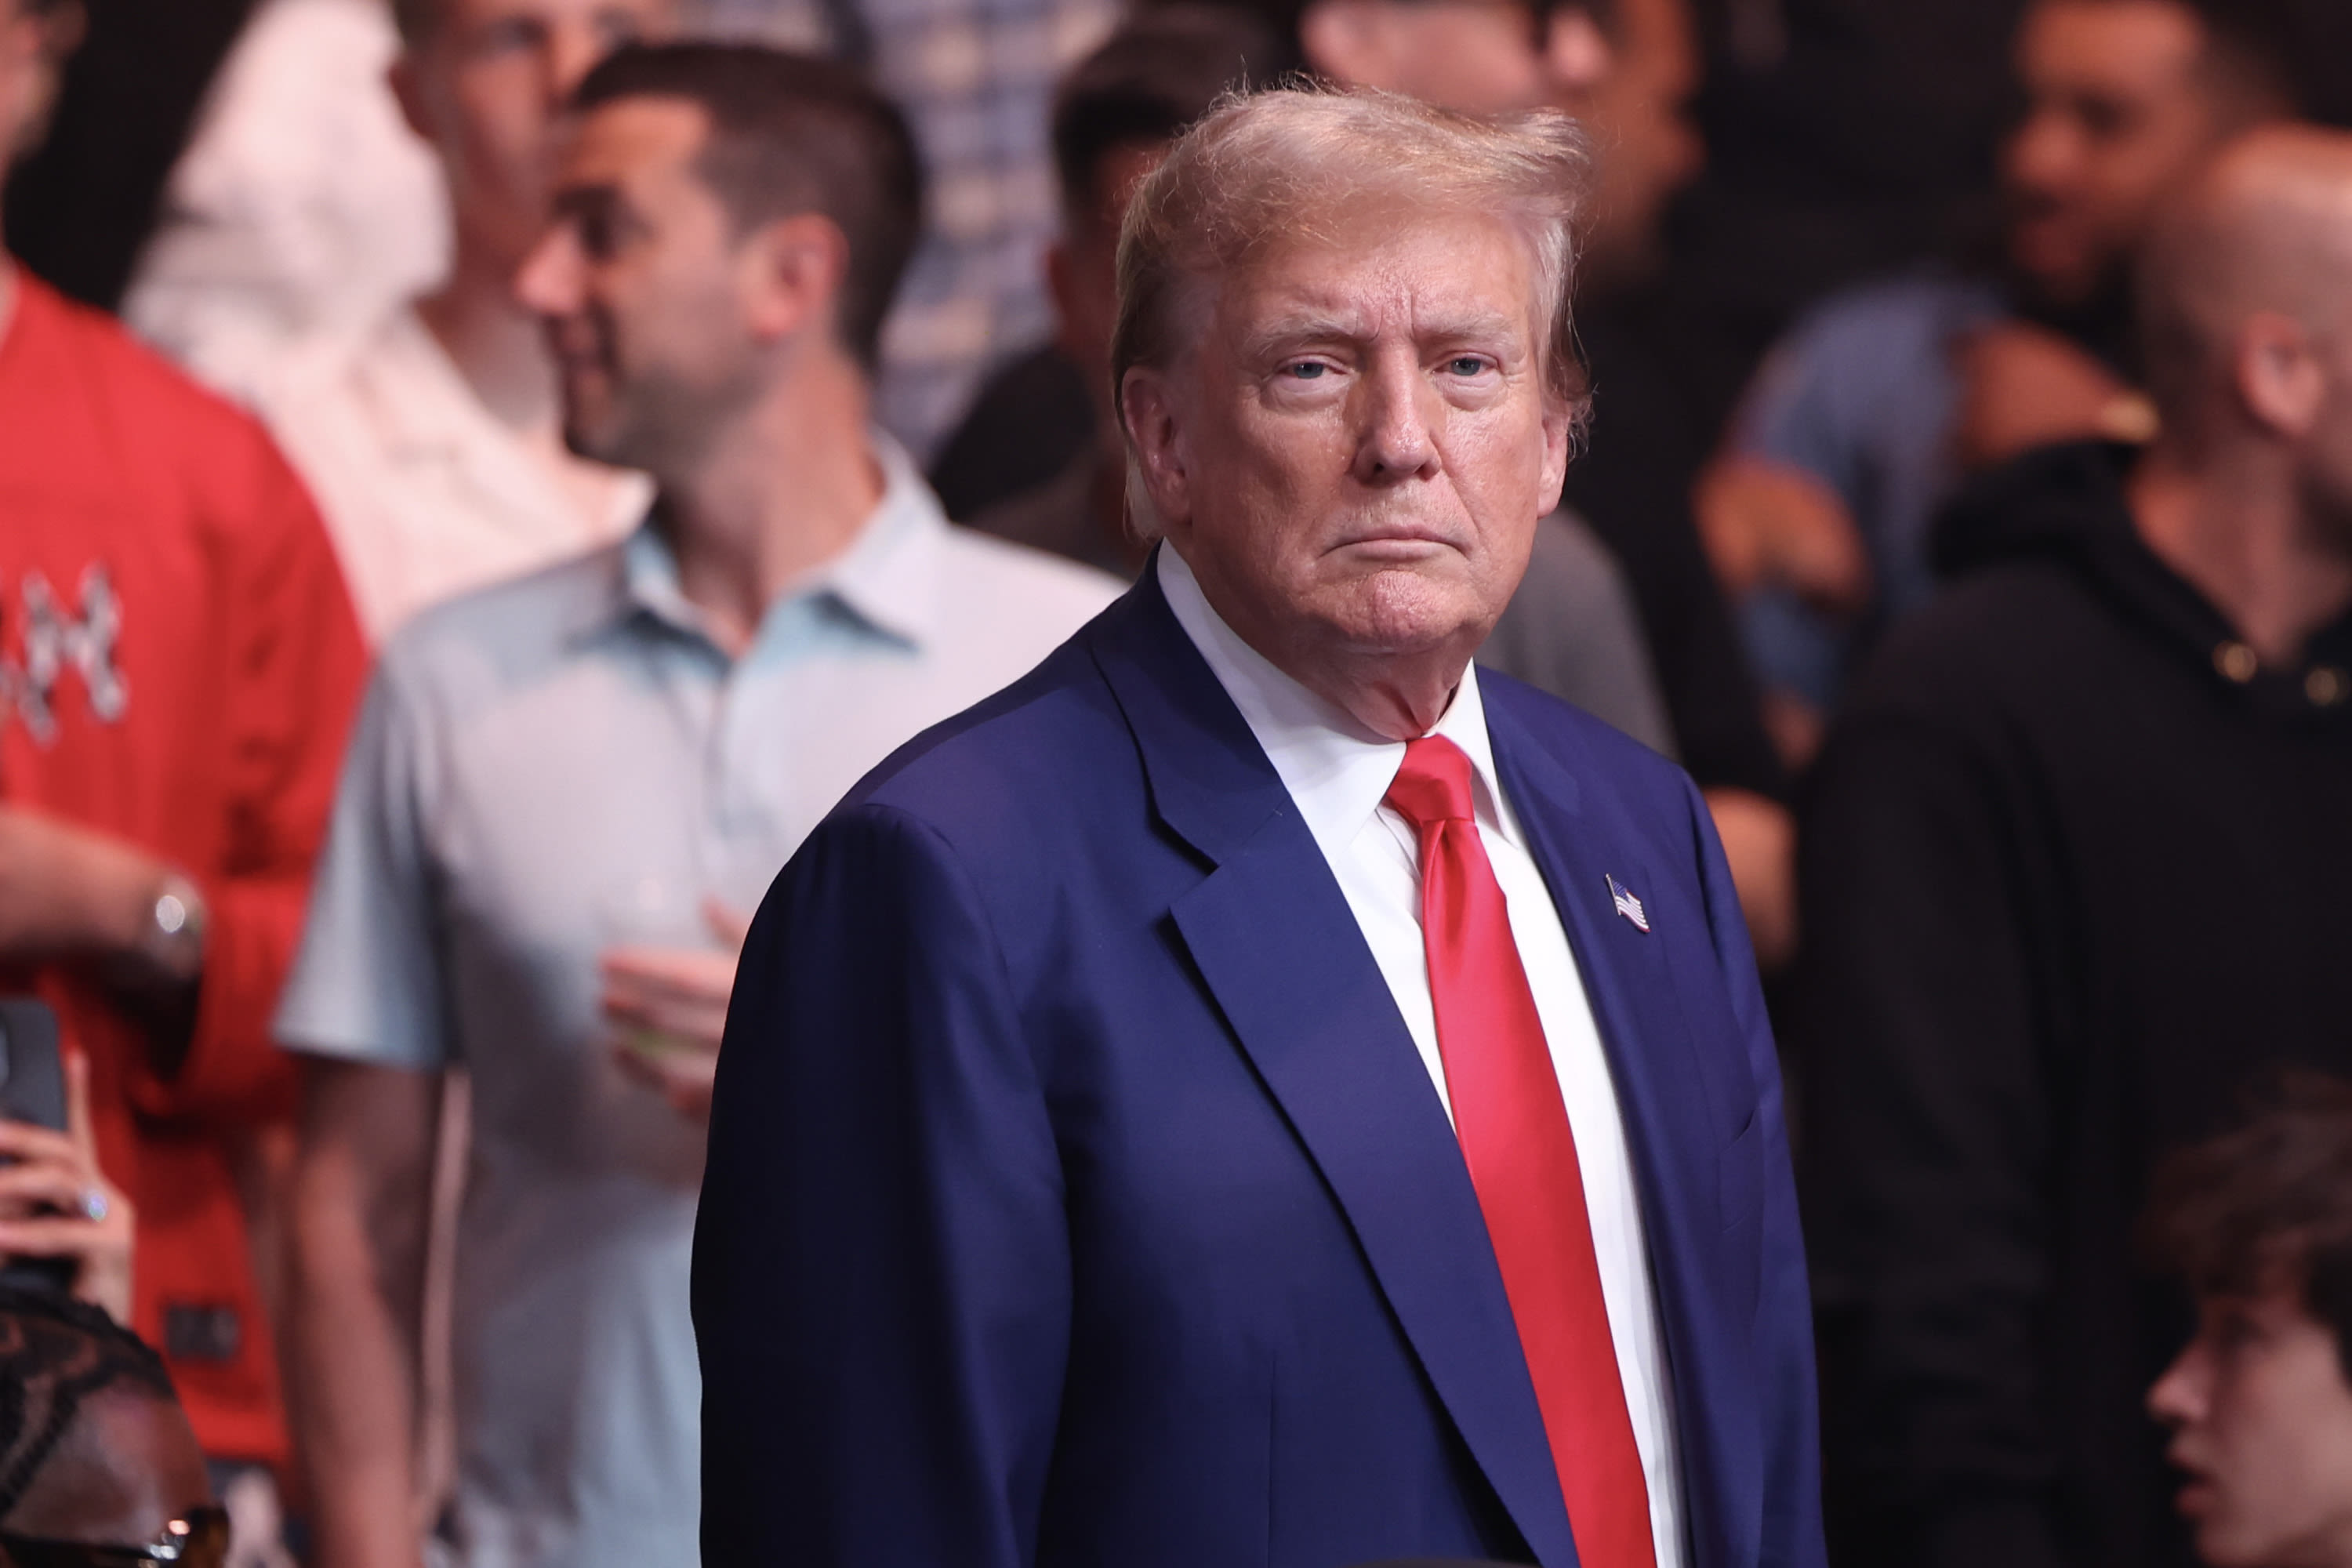 Donald Trump arrives to standing ovation at UFC event